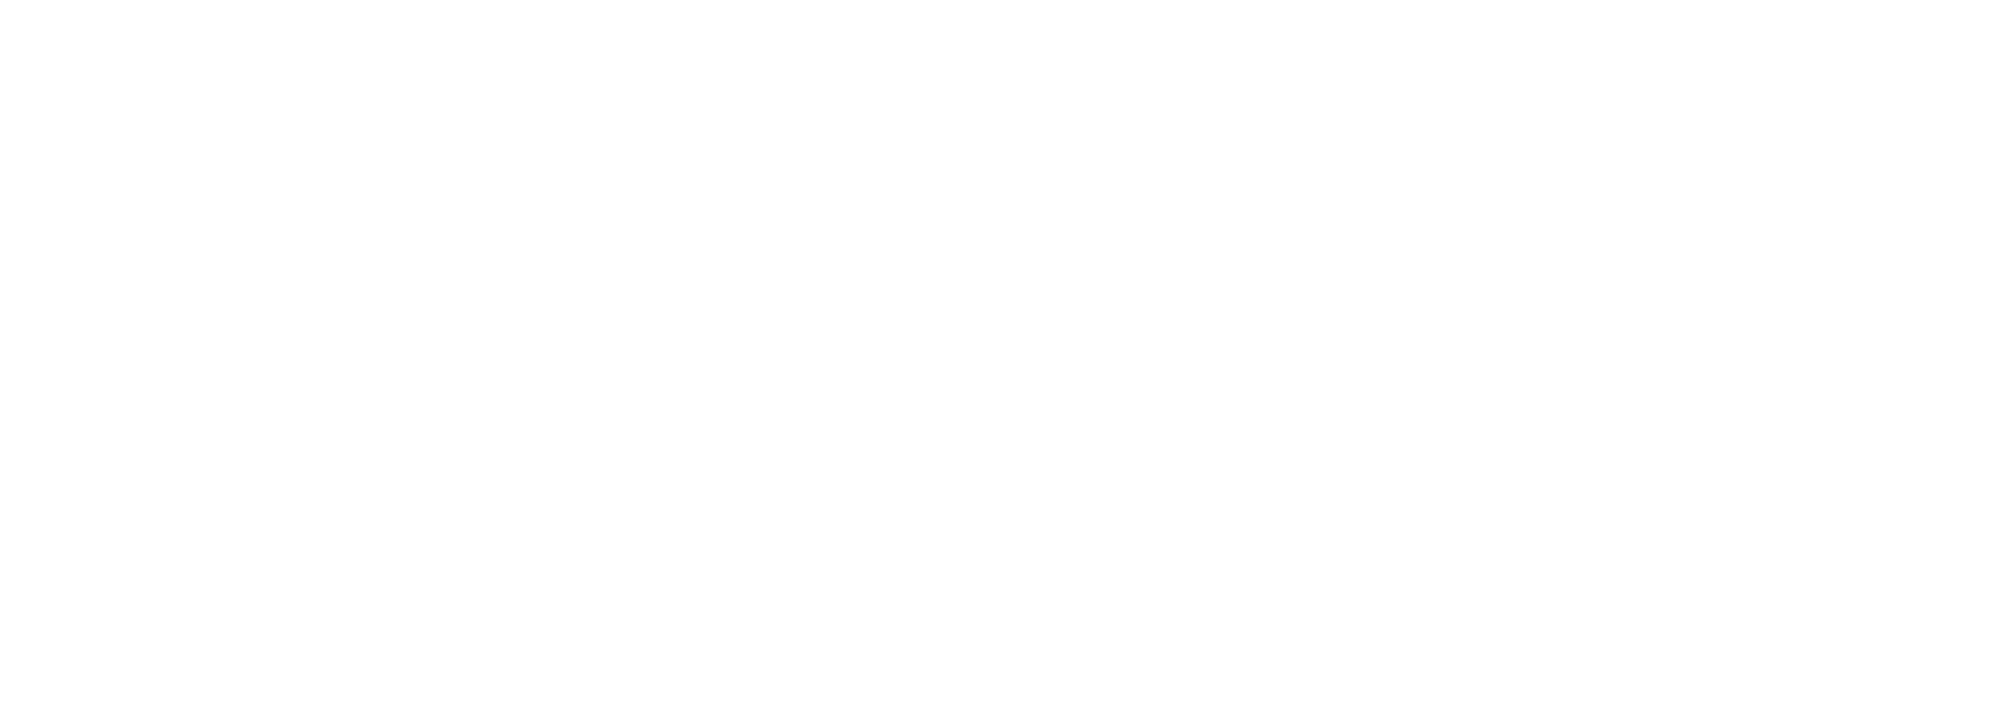 Building Drawing